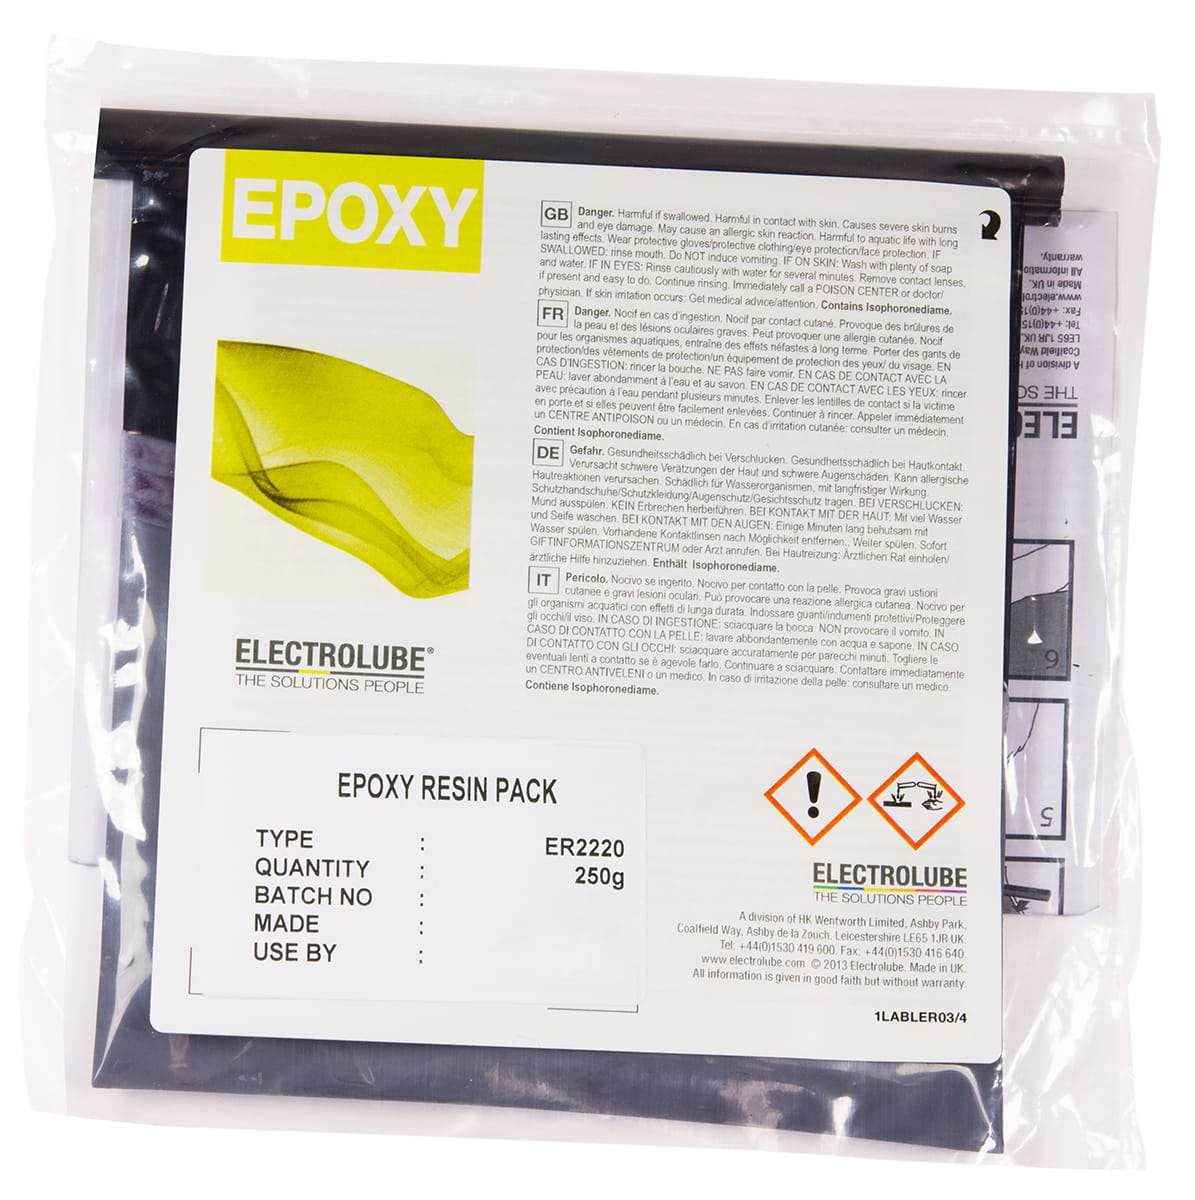 Epoxy: Definition, Properties, Types, and Classes